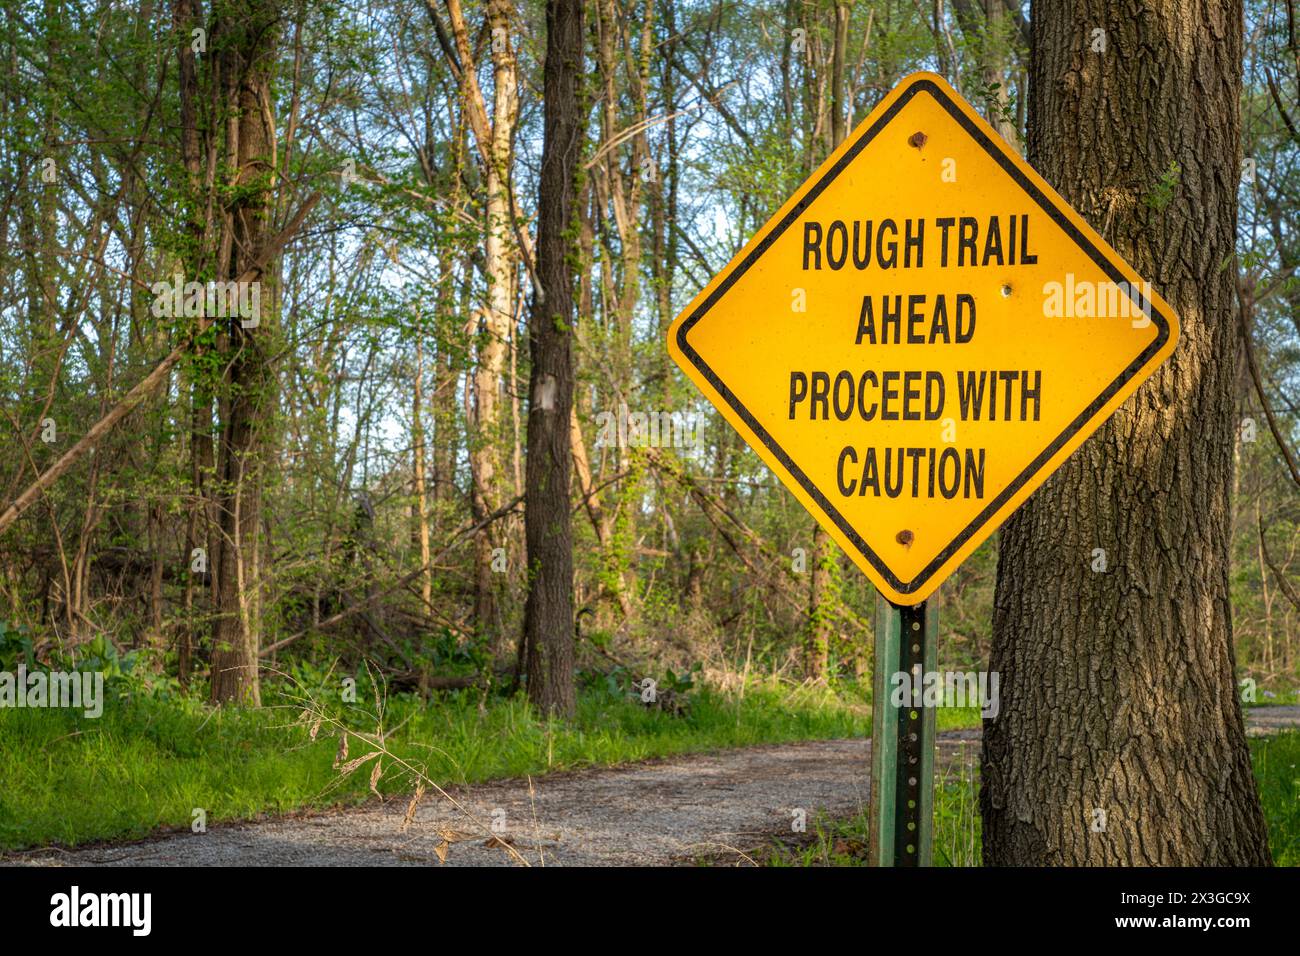 rough trail ahead, proceed with caution - warning sign on Steamboat Trace Trail converted from old railroad near Peru, Nebraska Stock Photo